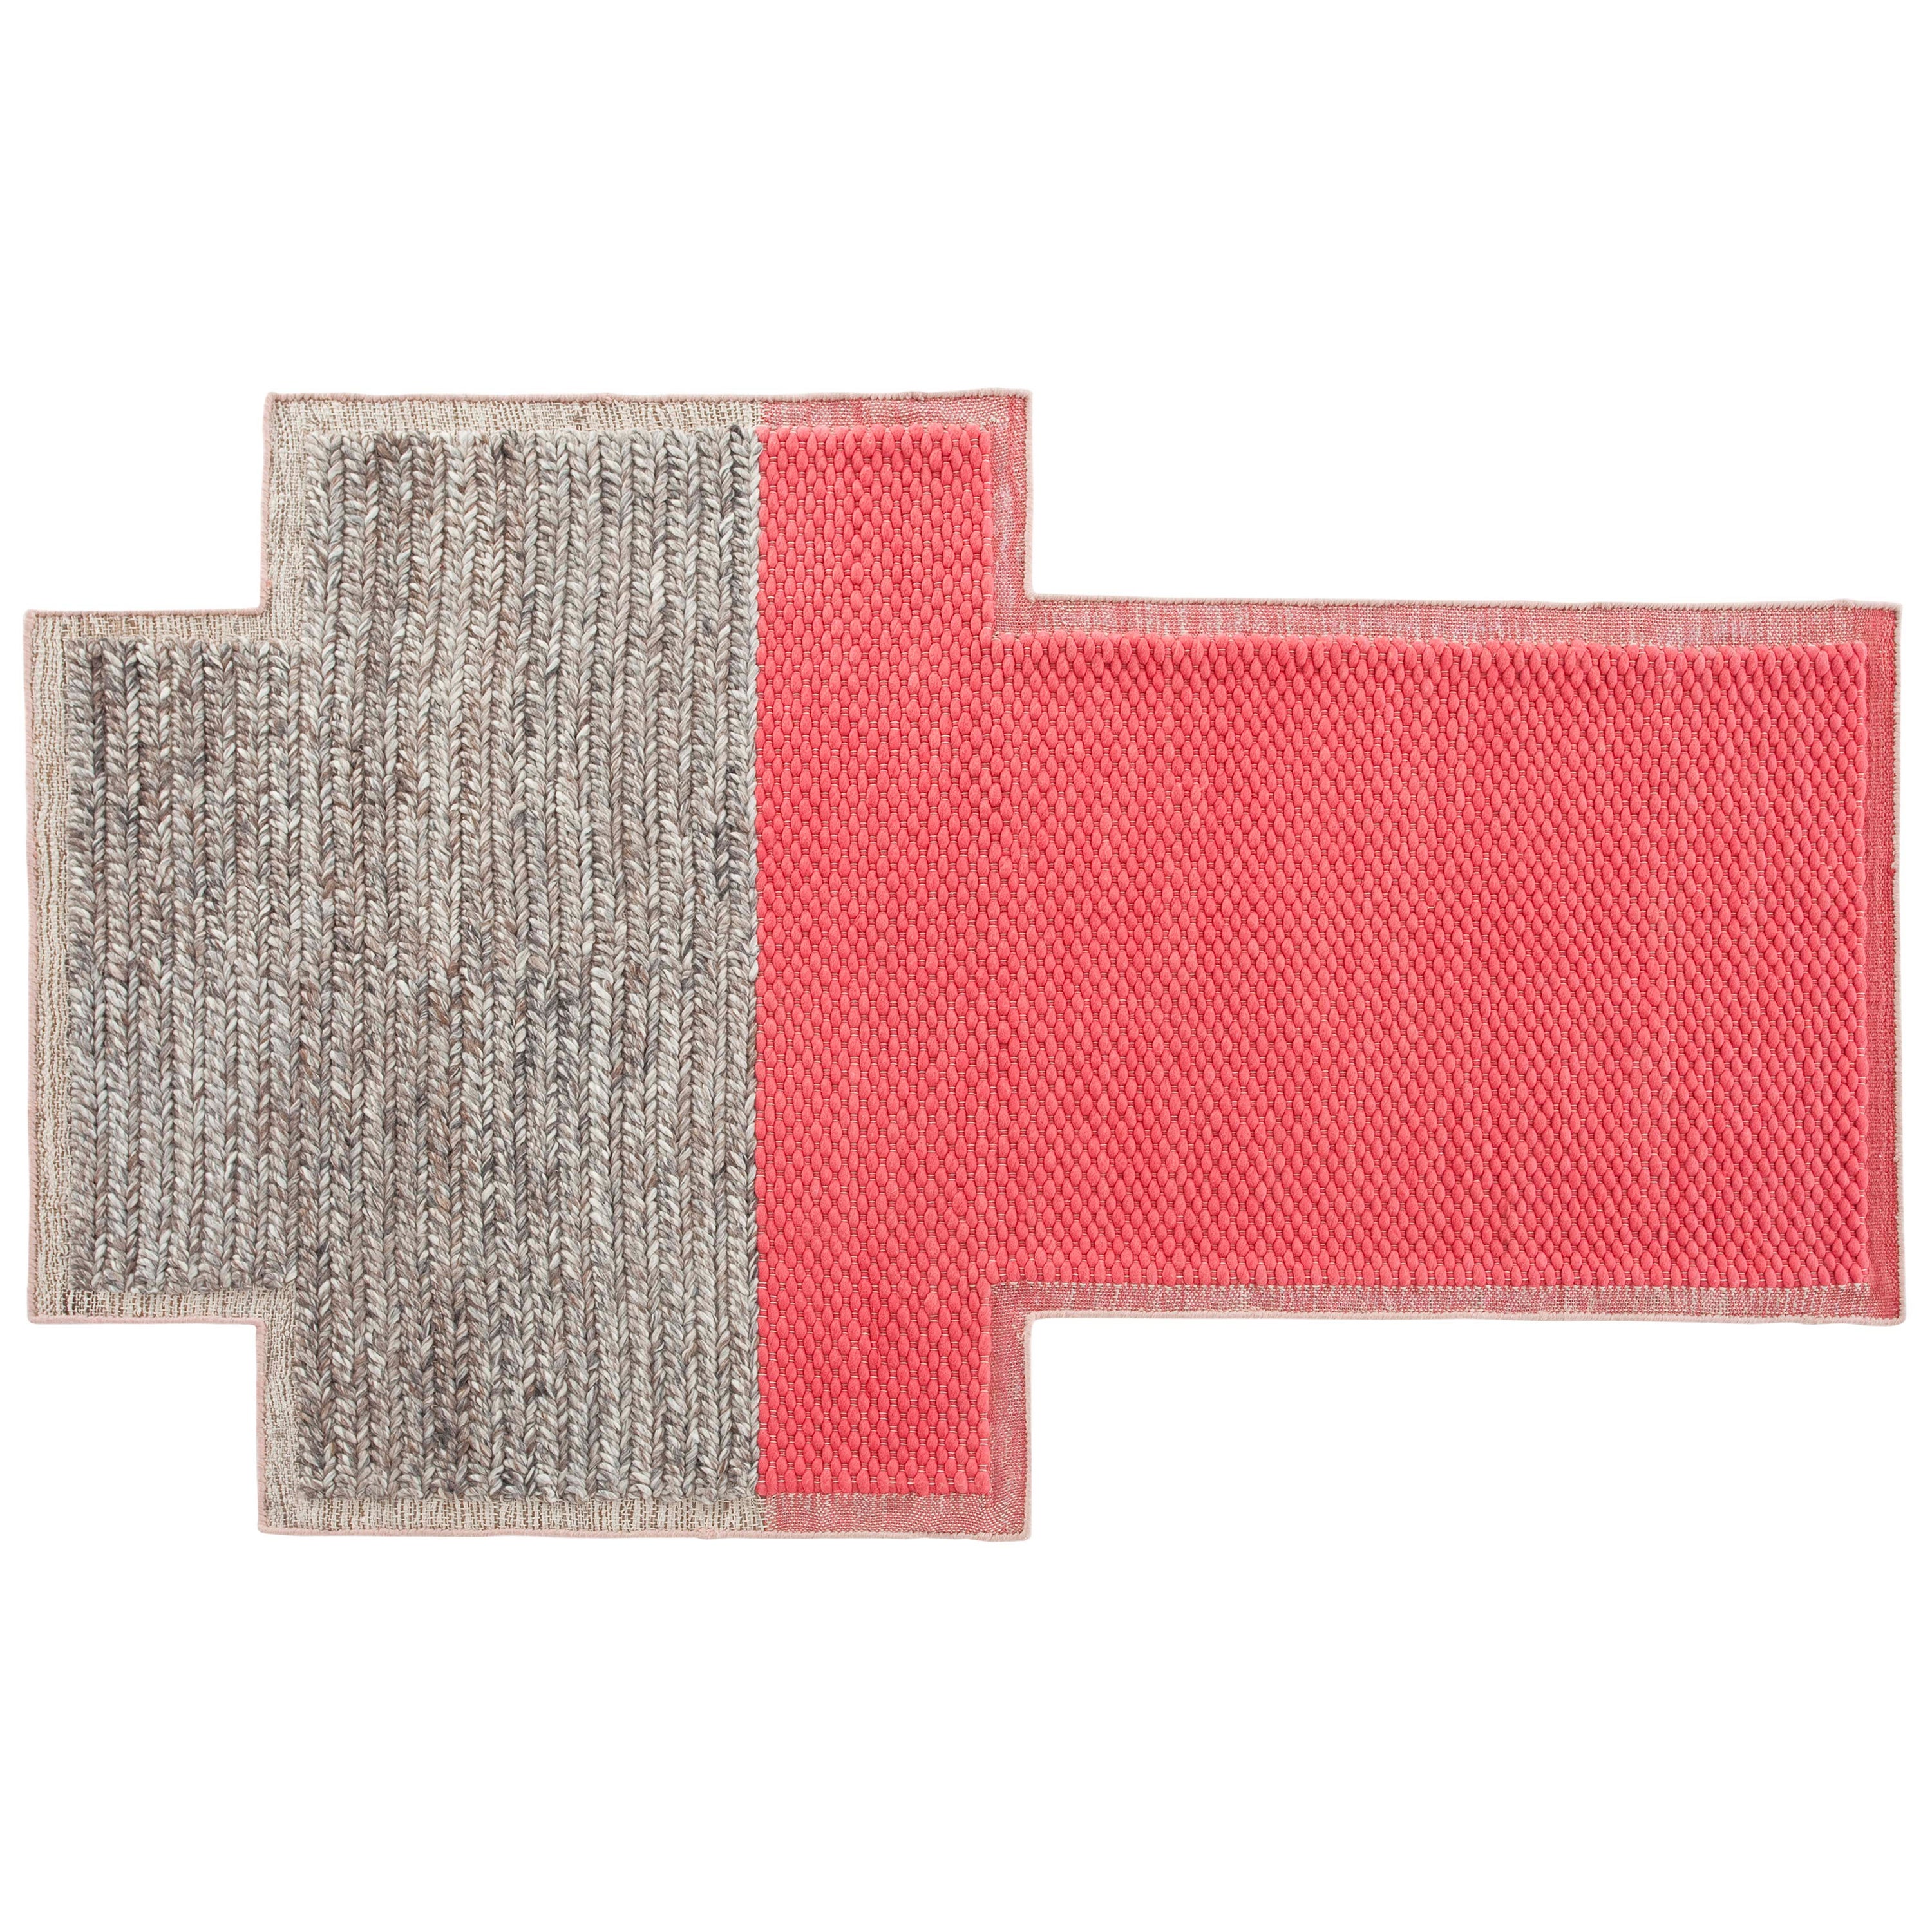 GAN Mangas Space Large Rectangular Rug Plait in Coral by Patricia Urquiola For Sale